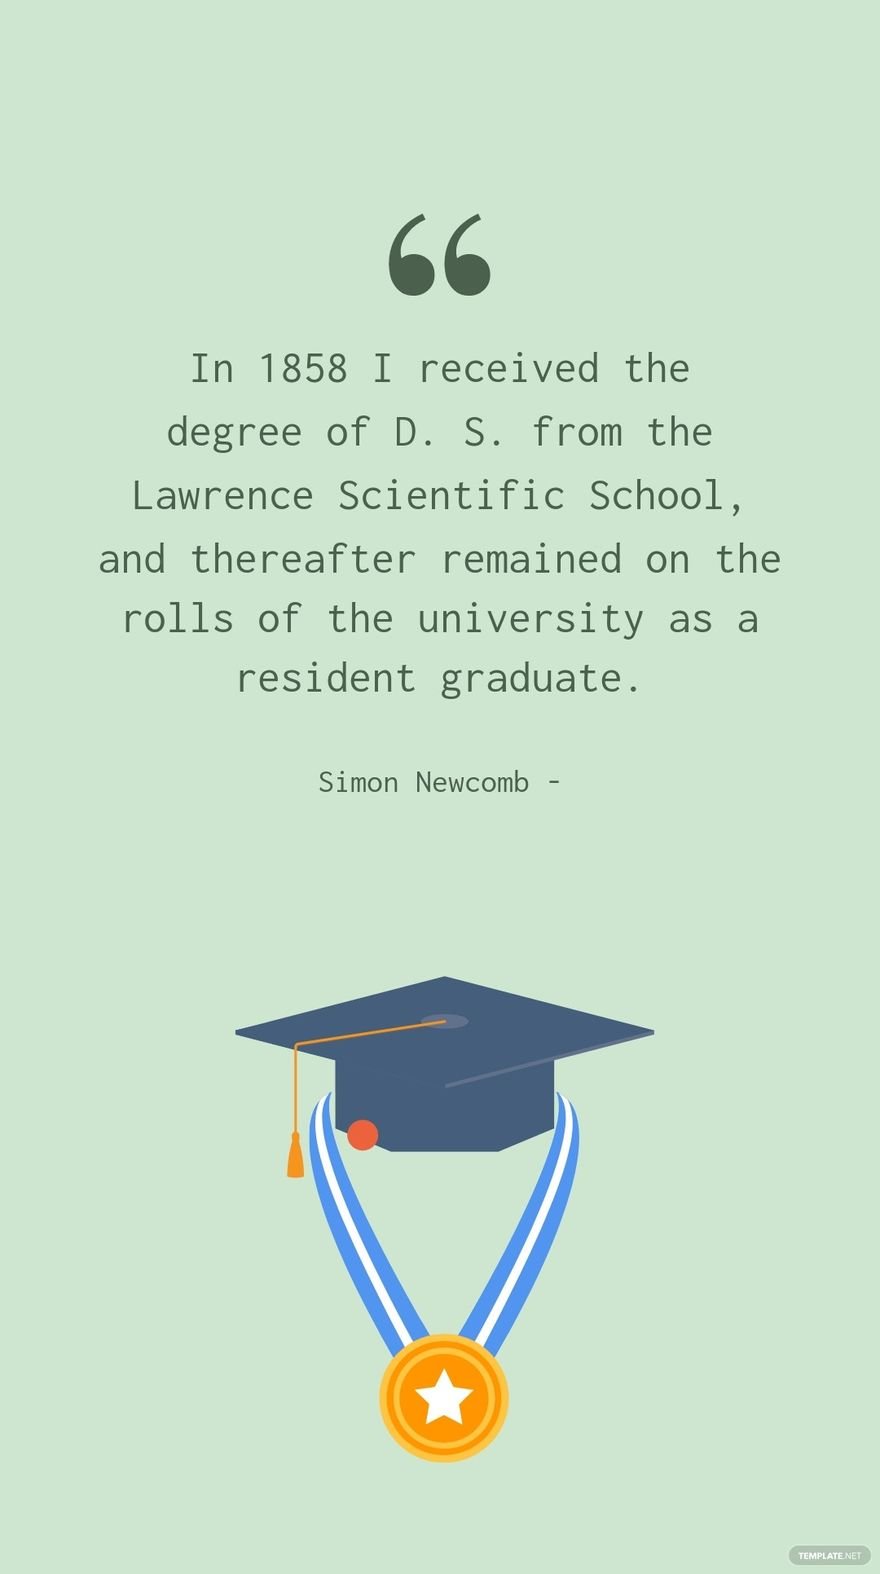 Free Simon Newcomb - In 1858 I received the degree of D. S. from the Lawrence Scientific School, and thereafter remained on the rolls of the university as a resident graduate. in JPG